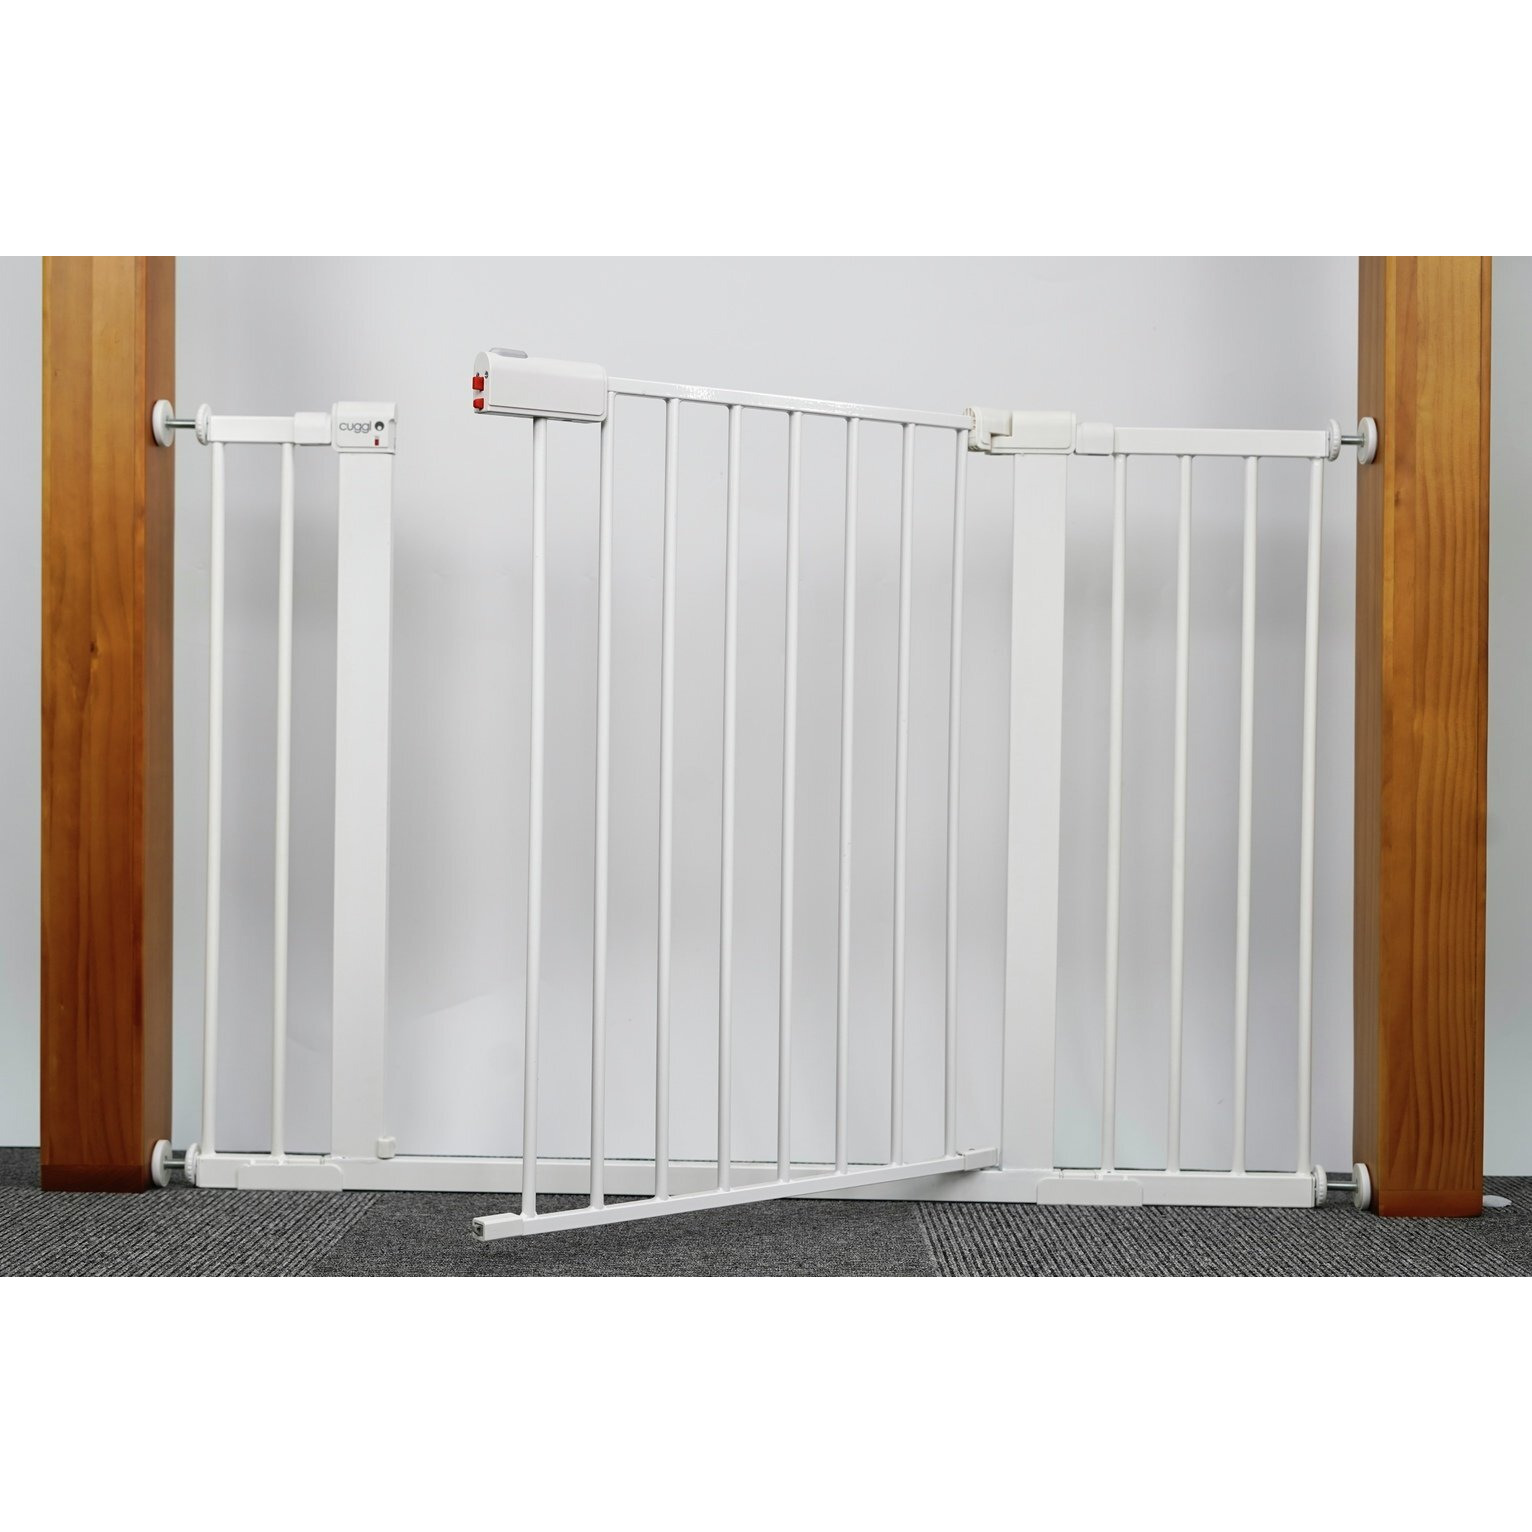 Cuggl Extra Wide Safety Gate - image 1